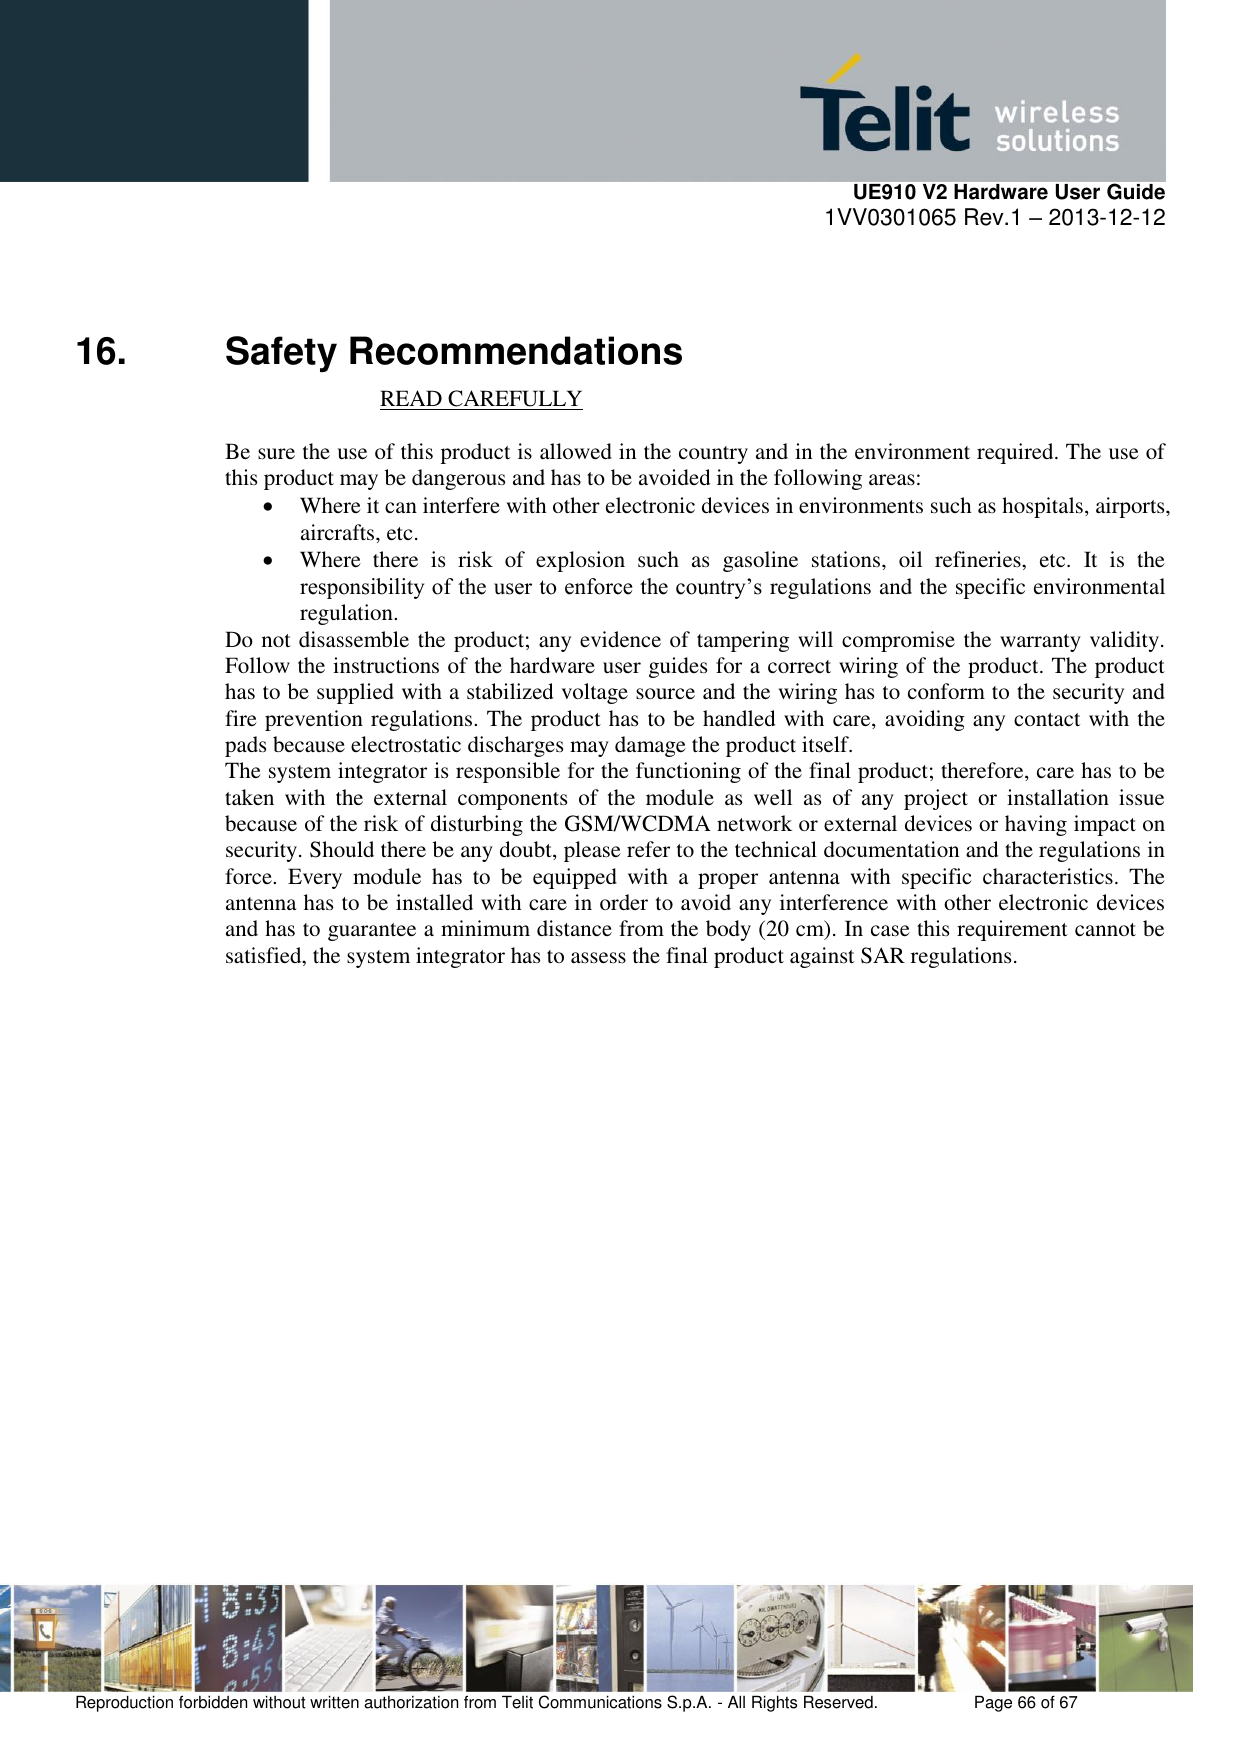     UE910 V2 Hardware User Guide 1VV0301065 Rev.1 – 2013-12-12  Reproduction forbidden without written authorization from Telit Communications S.p.A. - All Rights Reserved.    Page 66 of 67                                                     16.  Safety Recommendations                            READ CAREFULLY  Be sure the use of this product is allowed in the country and in the environment required. The use of this product may be dangerous and has to be avoided in the following areas:  Where it can interfere with other electronic devices in environments such as hospitals, airports, aircrafts, etc.  Where  there  is  risk  of  explosion  such  as  gasoline  stations,  oil  refineries,  etc.  It  is  the responsibility of the user to enforce the country’s regulations and the specific environmental regulation. Do not disassemble the product; any evidence of tampering will compromise the warranty validity.  Follow the instructions of the hardware user guides for a correct wiring of the product. The product has to be supplied with a stabilized voltage source and the wiring has to conform to the security and fire prevention regulations. The product has to be handled with care, avoiding any contact with the pads because electrostatic discharges may damage the product itself.  The system integrator is responsible for the functioning of the final product; therefore, care has to be taken  with  the  external  components  of  the  module  as  well  as  of  any  project  or  installation  issue because of the risk of disturbing the GSM/WCDMA network or external devices or having impact on security. Should there be any doubt, please refer to the technical documentation and the regulations in force.  Every  module  has  to  be  equipped  with  a  proper  antenna  with  specific  characteristics.  The antenna has to be installed with care in order to avoid any interference with other electronic devices and has to guarantee a minimum distance from the body (20 cm). In case this requirement cannot be satisfied, the system integrator has to assess the final product against SAR regulations.   